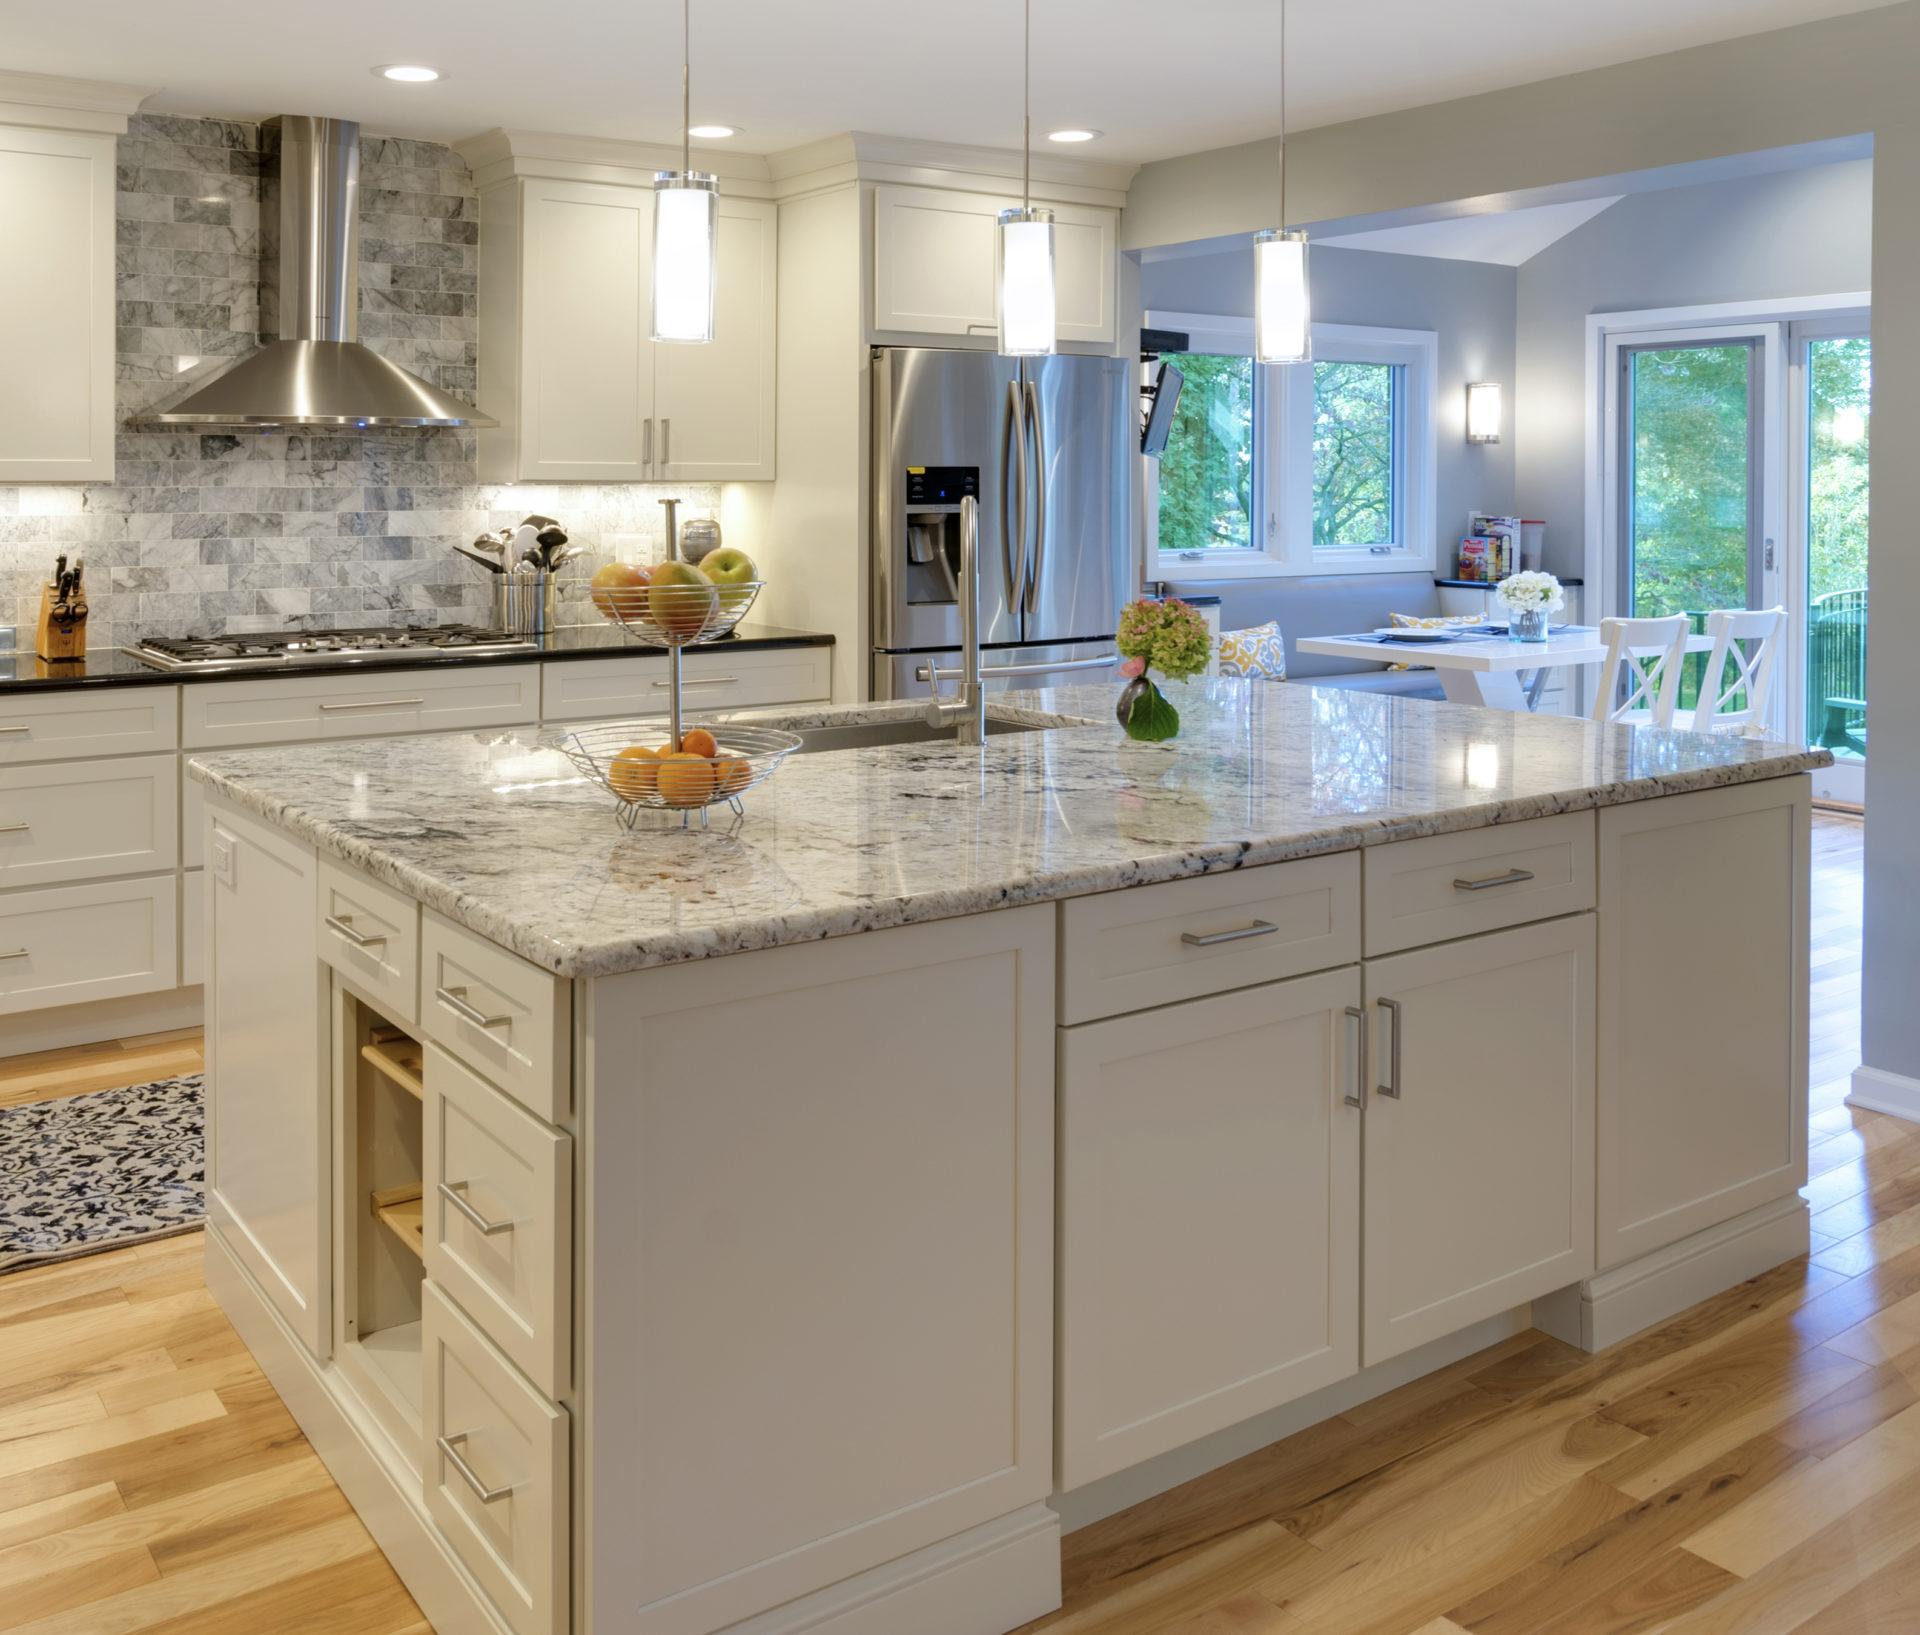 Construction Changes Are The Best Investments In A Kitchen Renovation